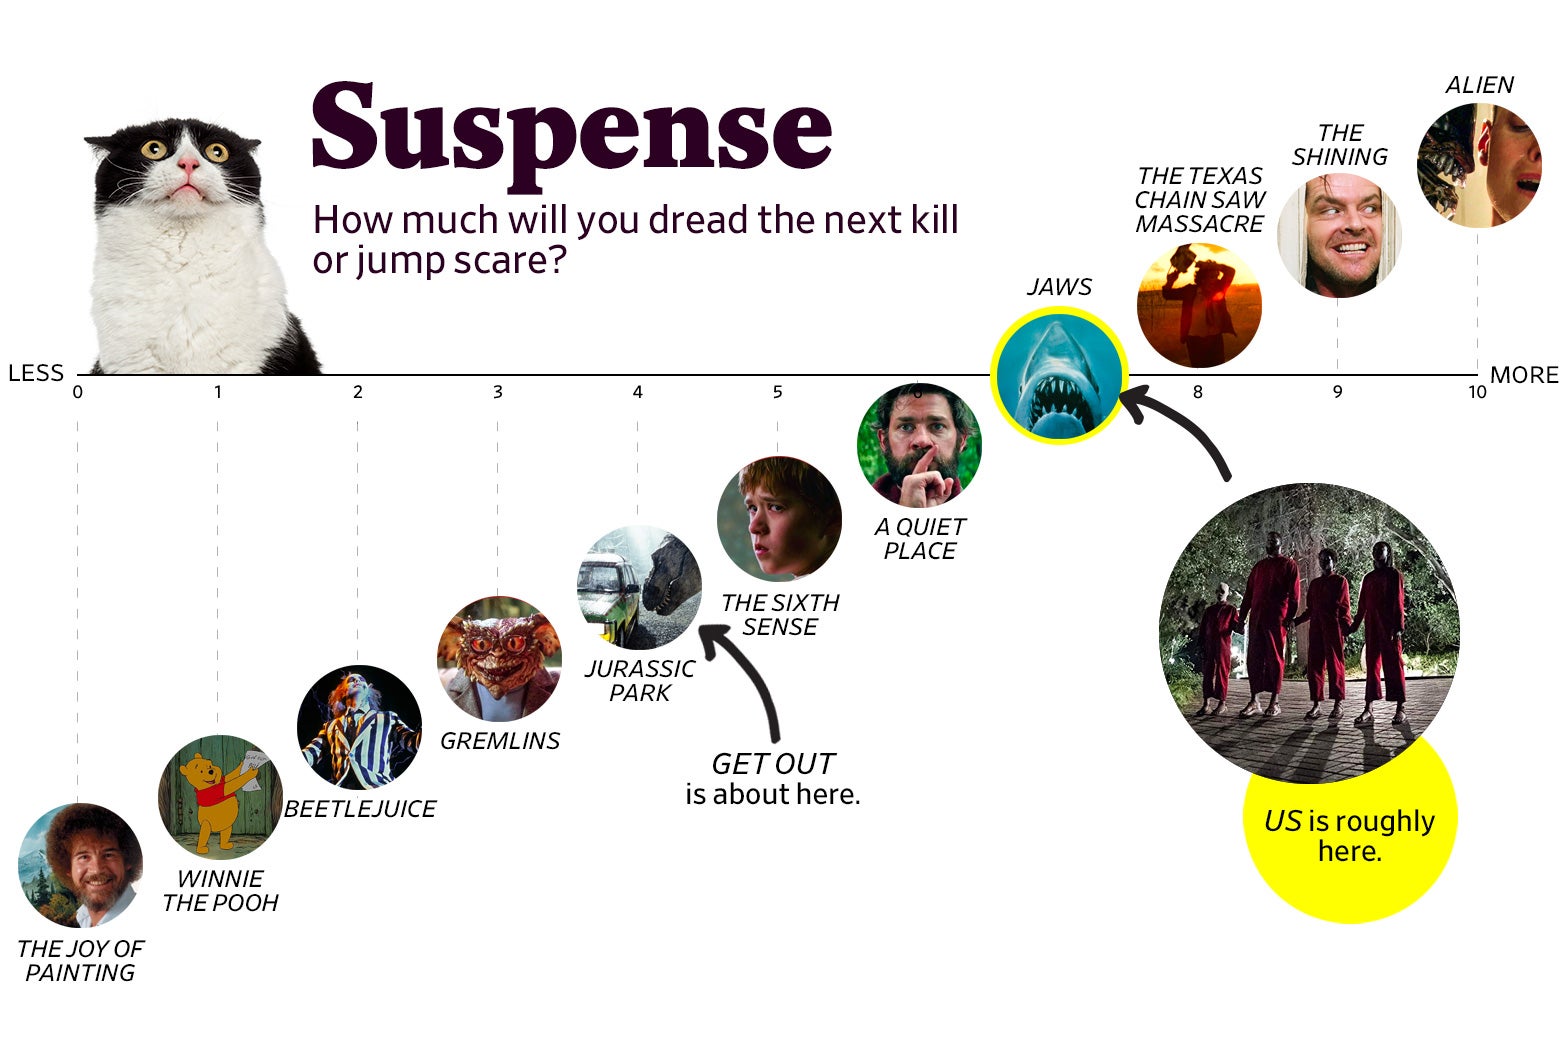 A chart titled “Suspense: How much will you dread the next kill or jump scare?” shows that Us ranks a 7 in suspense, roughly the same as Jaws. The scale ranges from The Joy of Painting (0) to Alien (10).